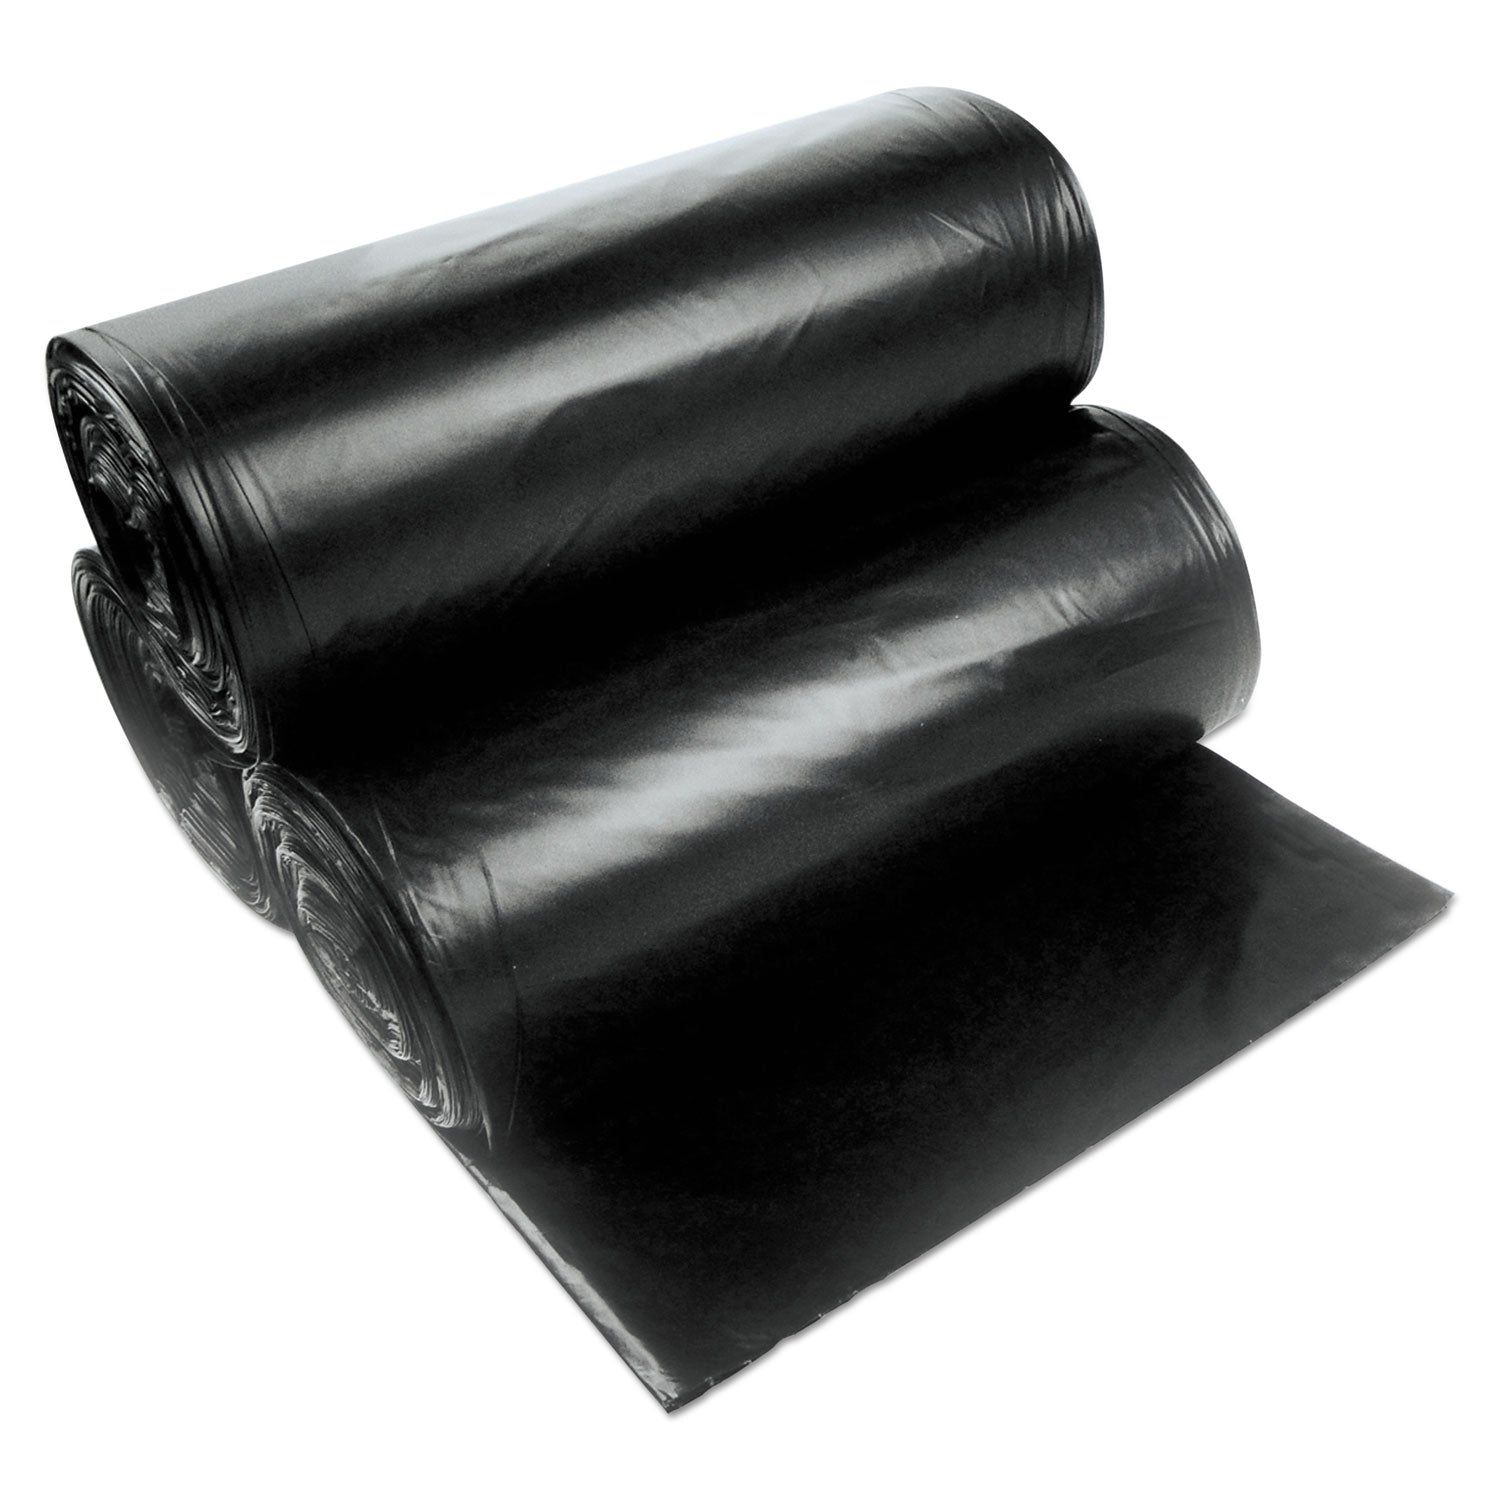 linear-low-density-can-liners-with-accufit-sizing-23-gal-13-mil-28-x-45-black-20-bags-roll-10-rolls-carton_herh5645pkr01 - 1